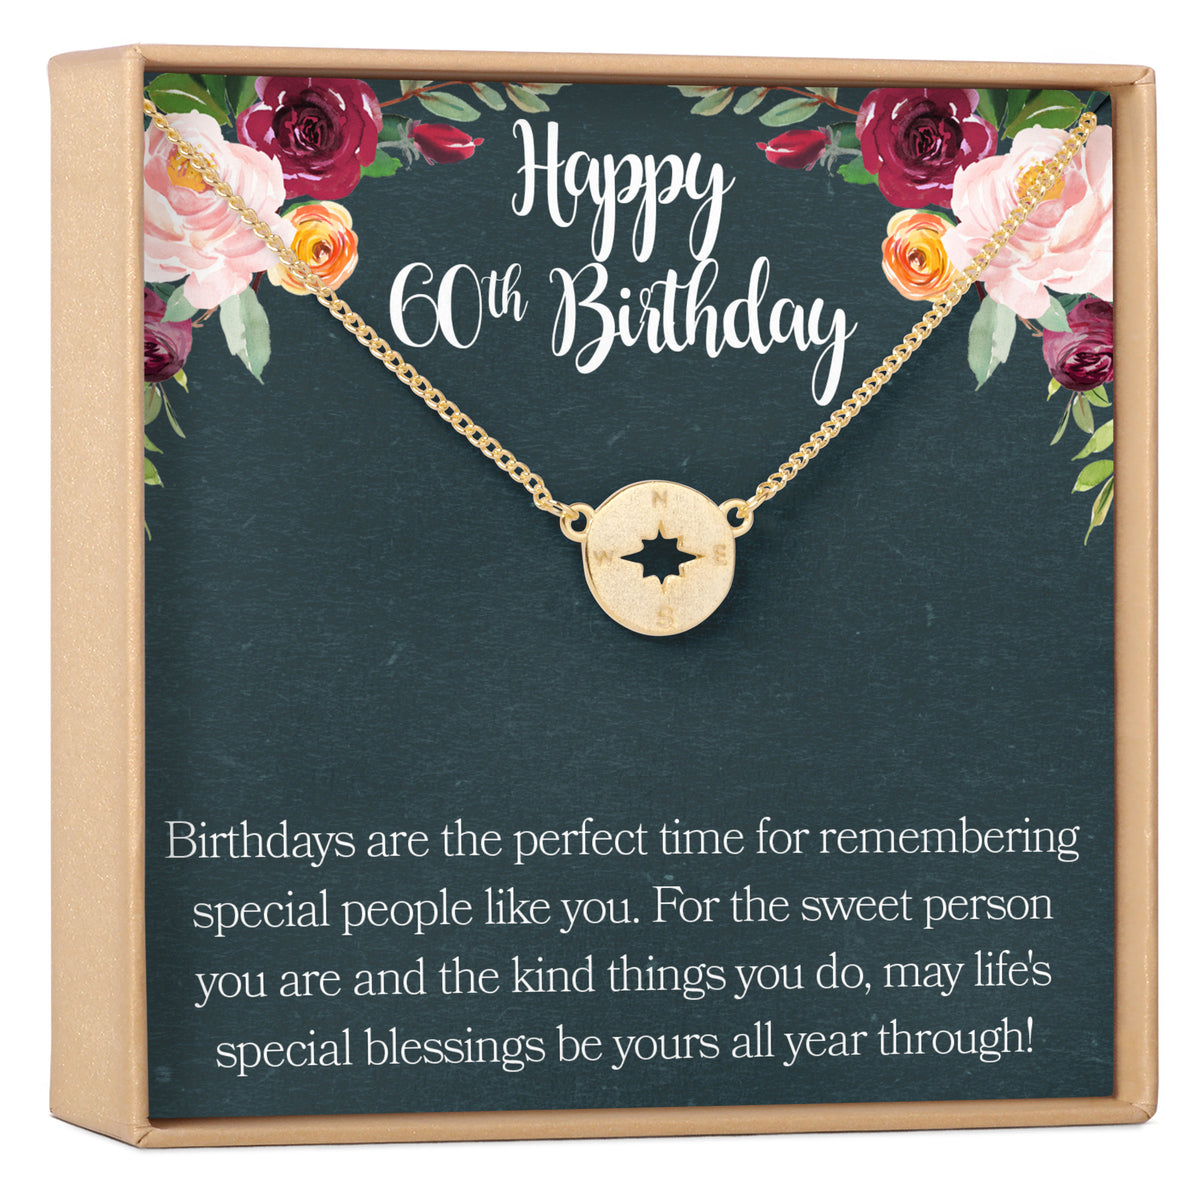 60th Birthday Necklace, Multiple Styles